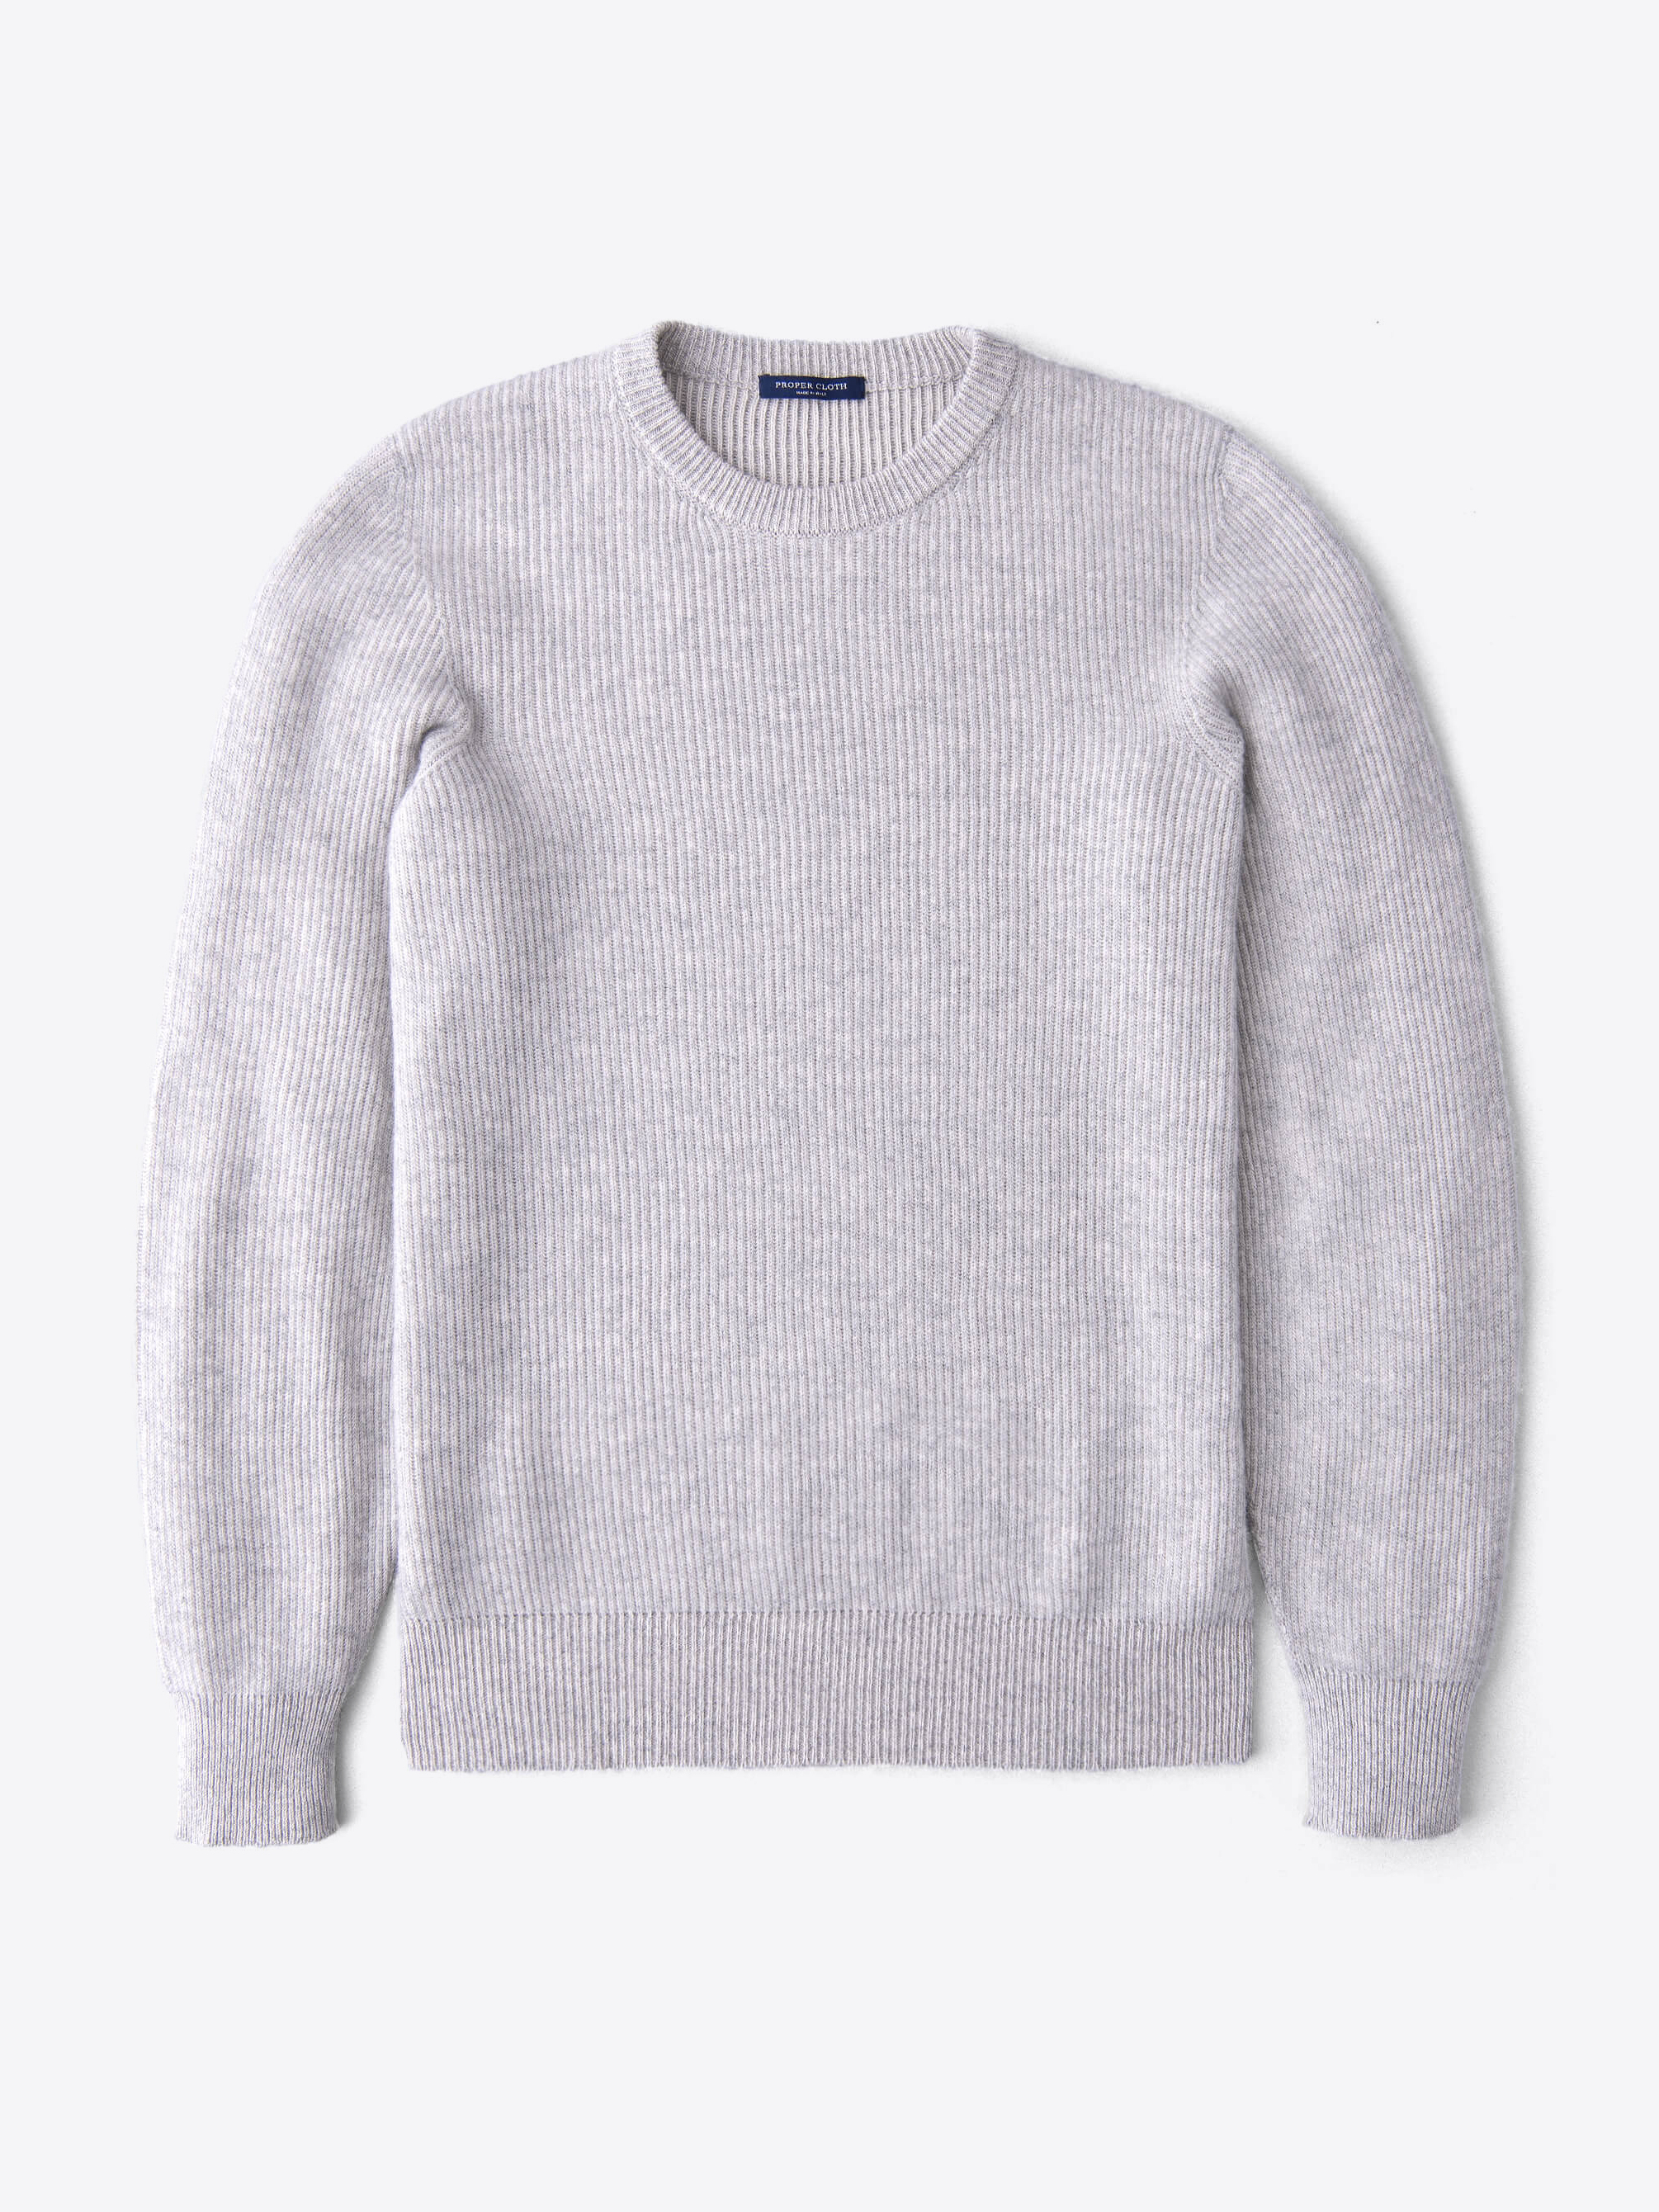 Zoom Image of Wheat Cotton and Cashmere Crewneck